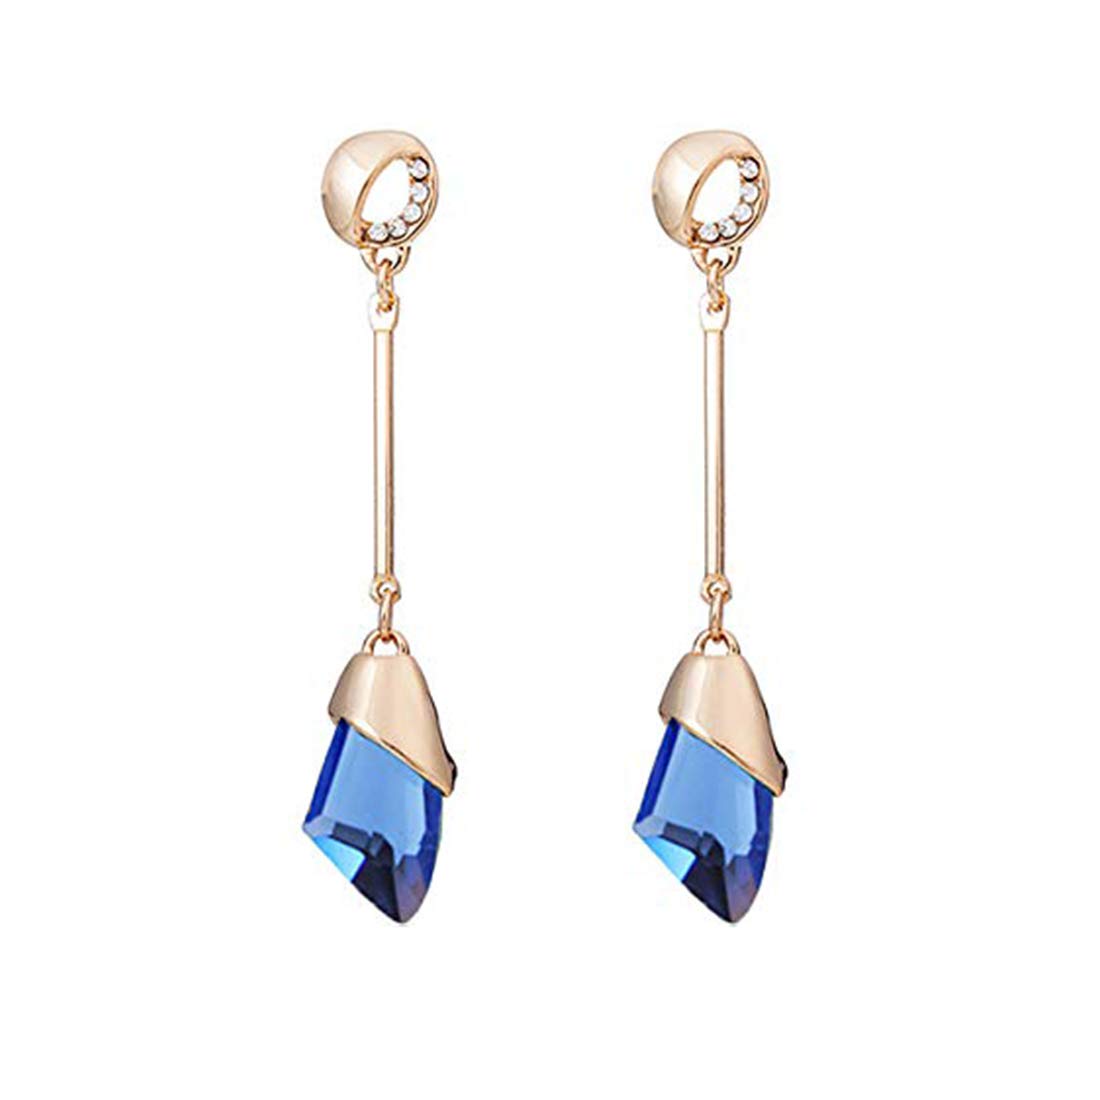 Yellow Chimes Rose Gold Long Hangings Blue Crystal Earring for Women and Girls